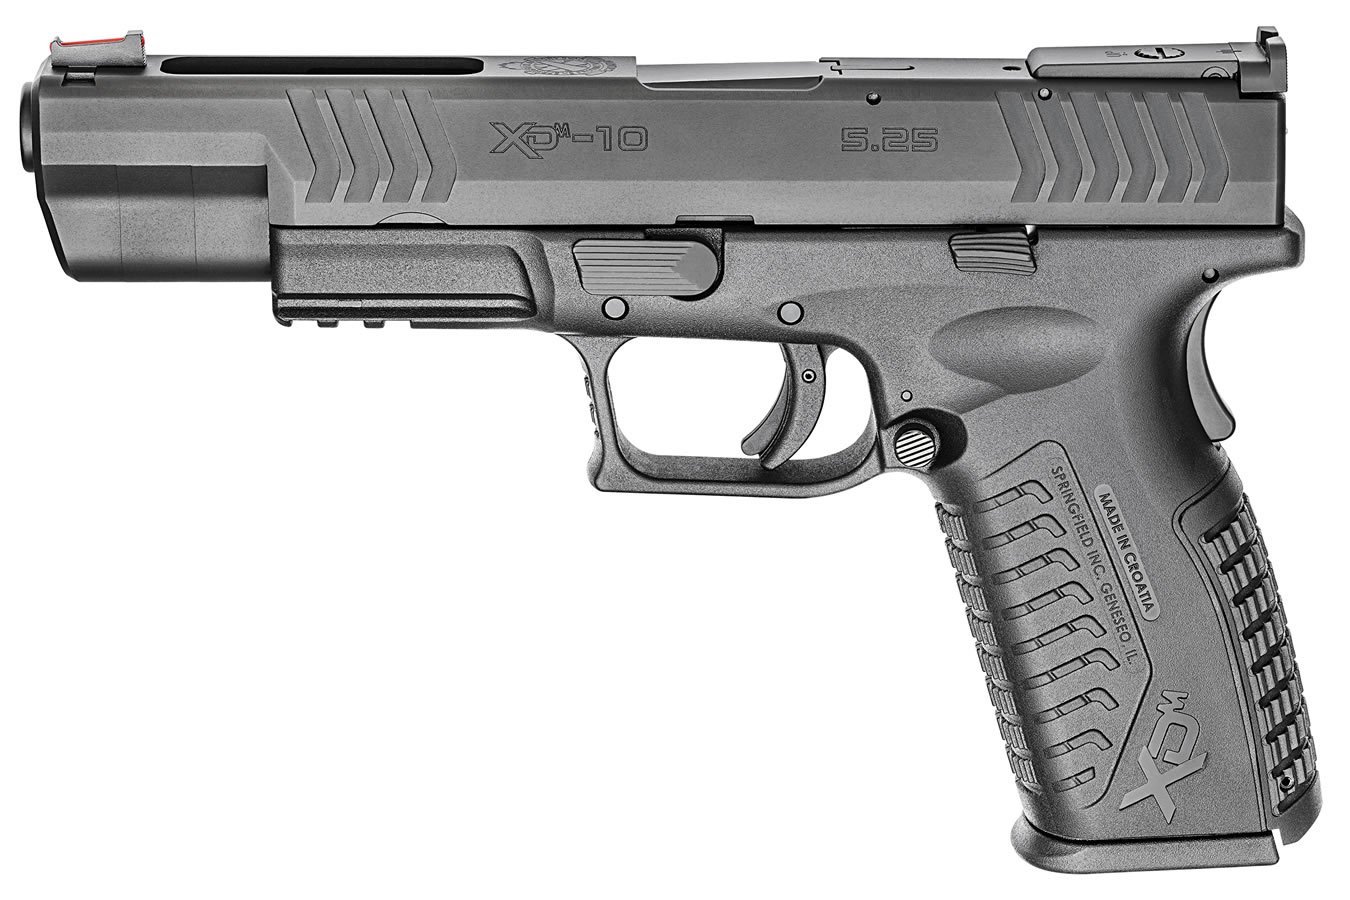 These Are The 5 Best Handguns For New Gun Owners And Home Defense The National Interest